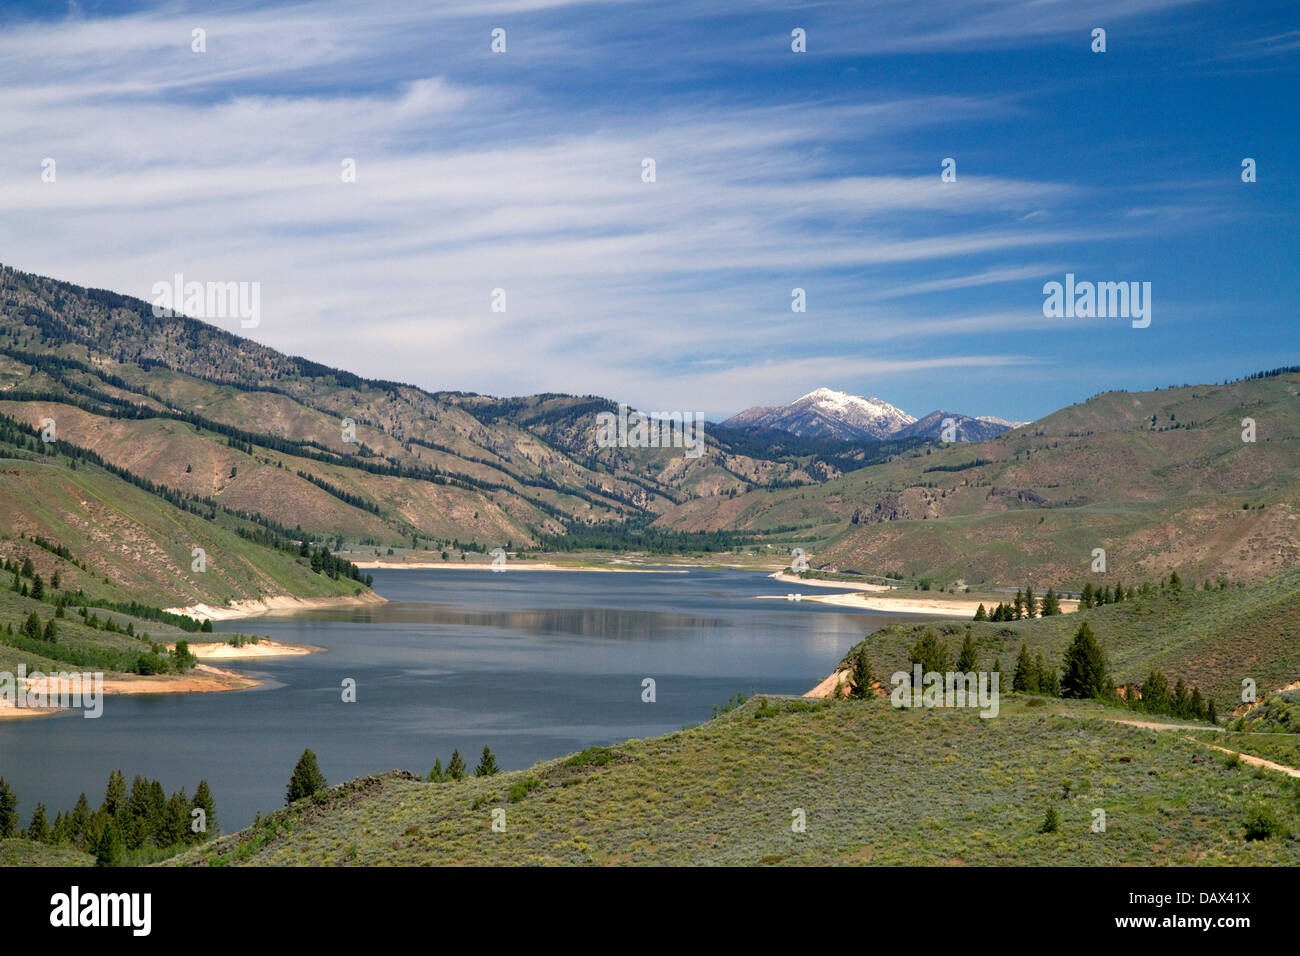 Scenic view of the South Fork of the Boise River canyon at Anderson Ranch Reservoir, Idaho, USA. Stock Photo